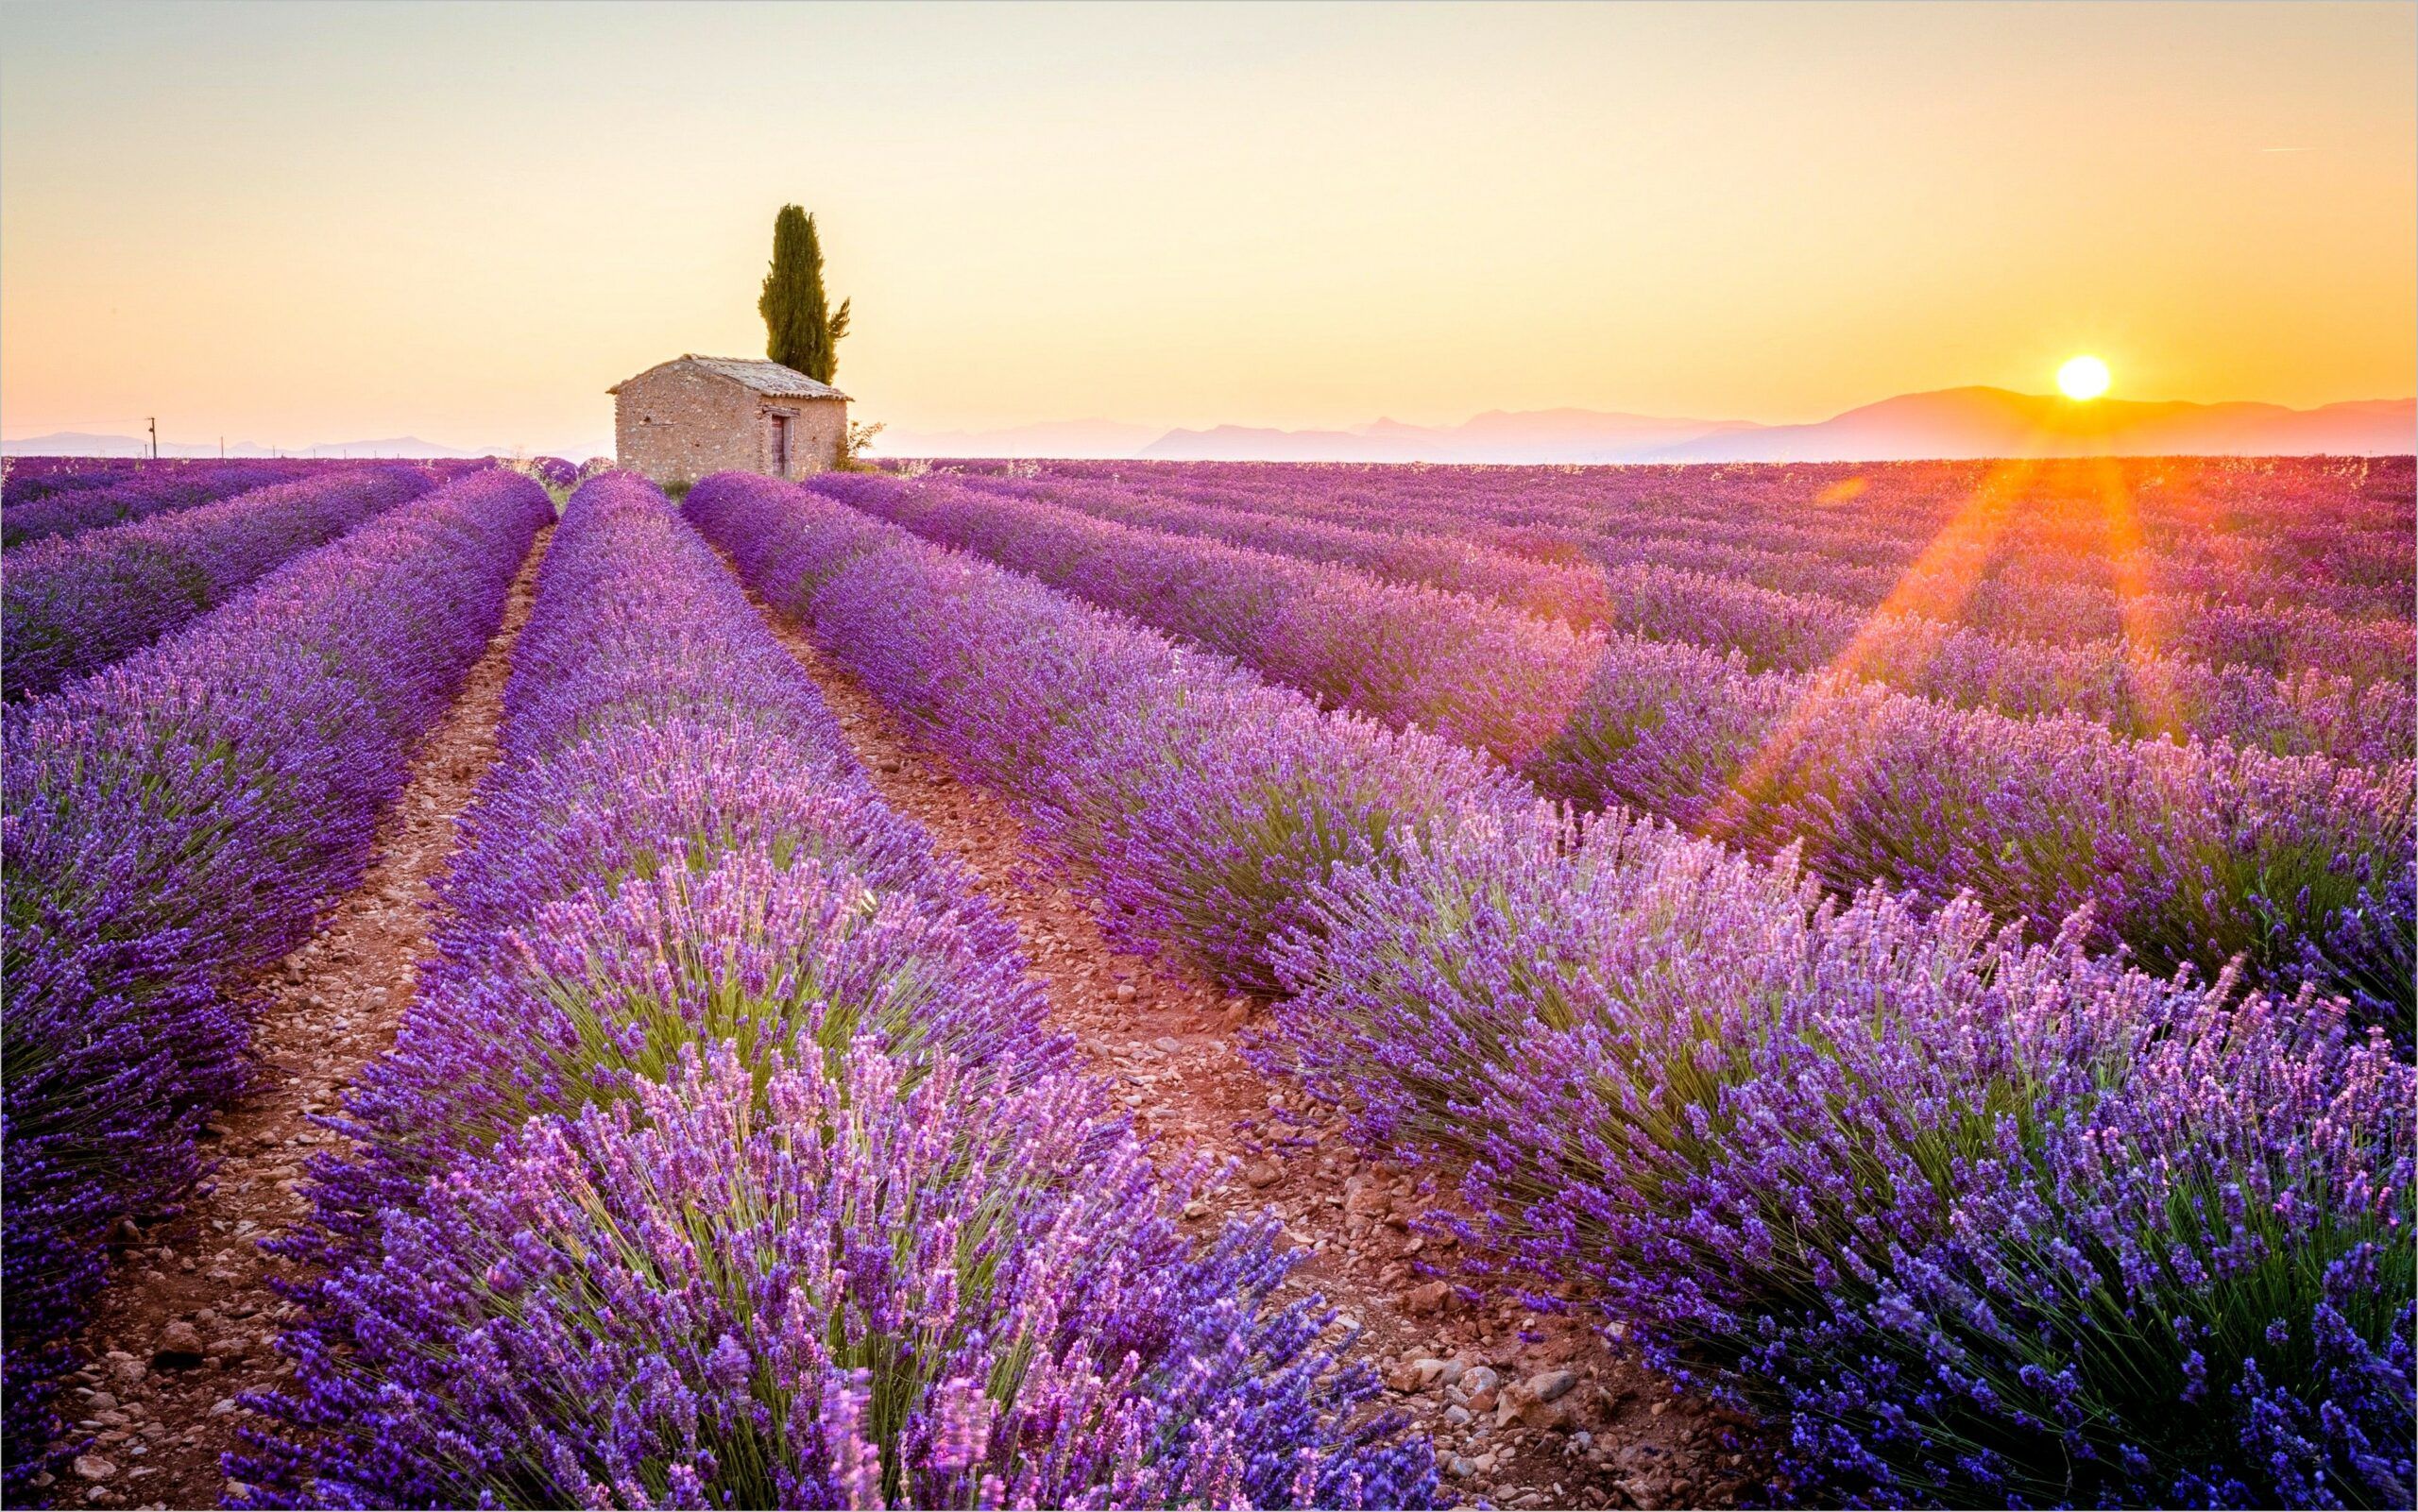 8. "Lavender Fields" - A dreamy, lavender shade that will transport you to a field of flowers - wide 6